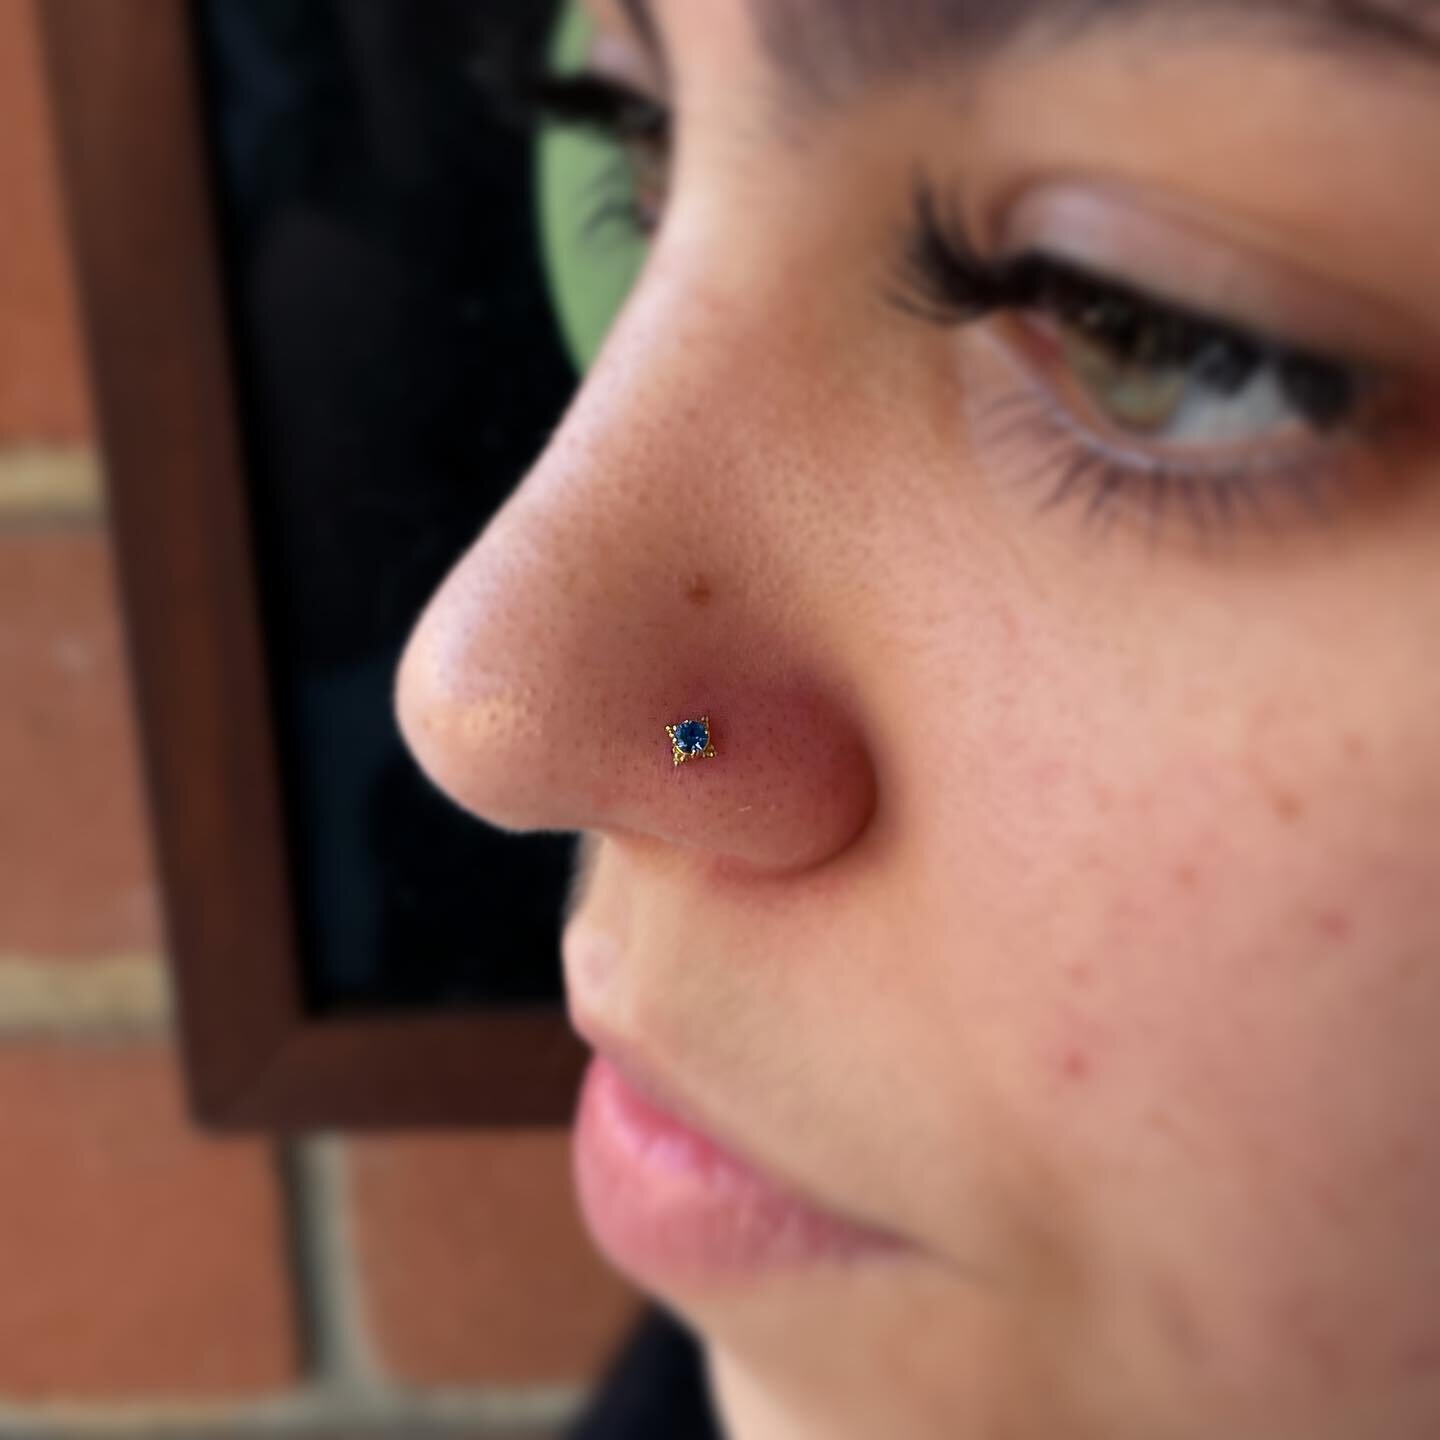 Fresh lil nostril from the other day as her birthday treat! Rockin an 18kt yellow gold 2mm sapphire blue Beaded Zia from @anatometalinc